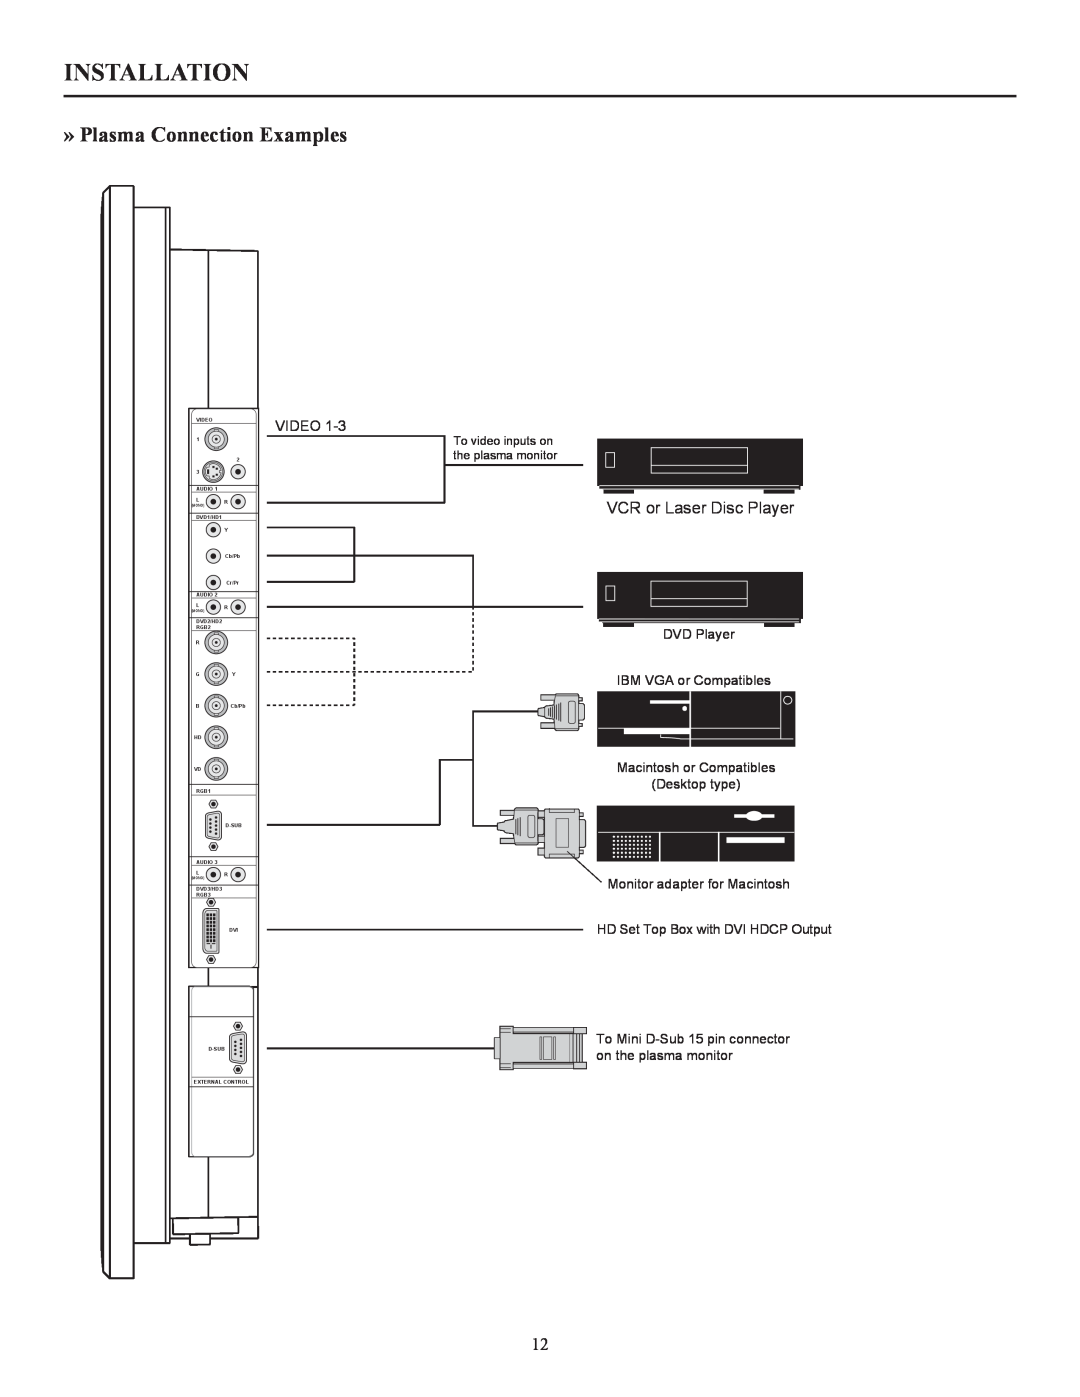 Runco CW-42i manual Installation, » Plasma Connection Examples, VCR or Laser Disc Player 